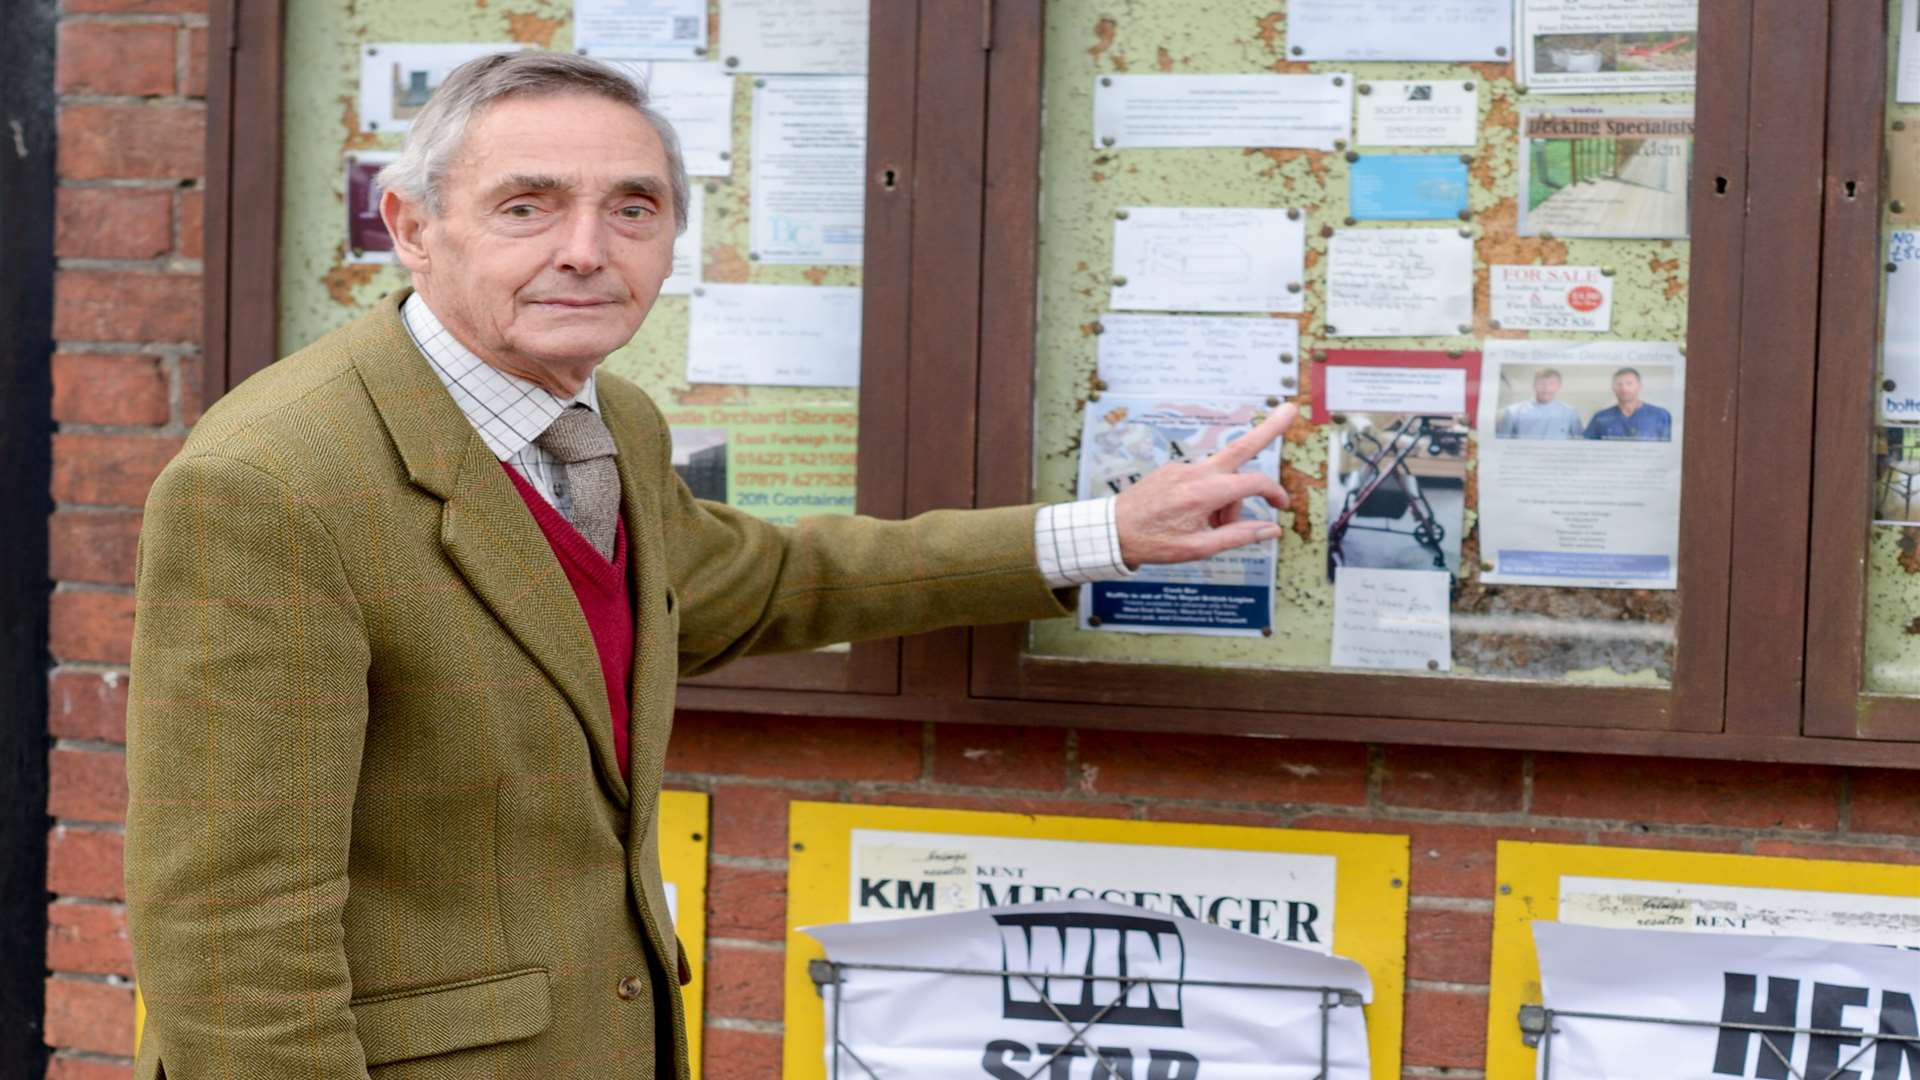 Dudley has placed an appeal for help in his local noticeboard. Picture: SWNS